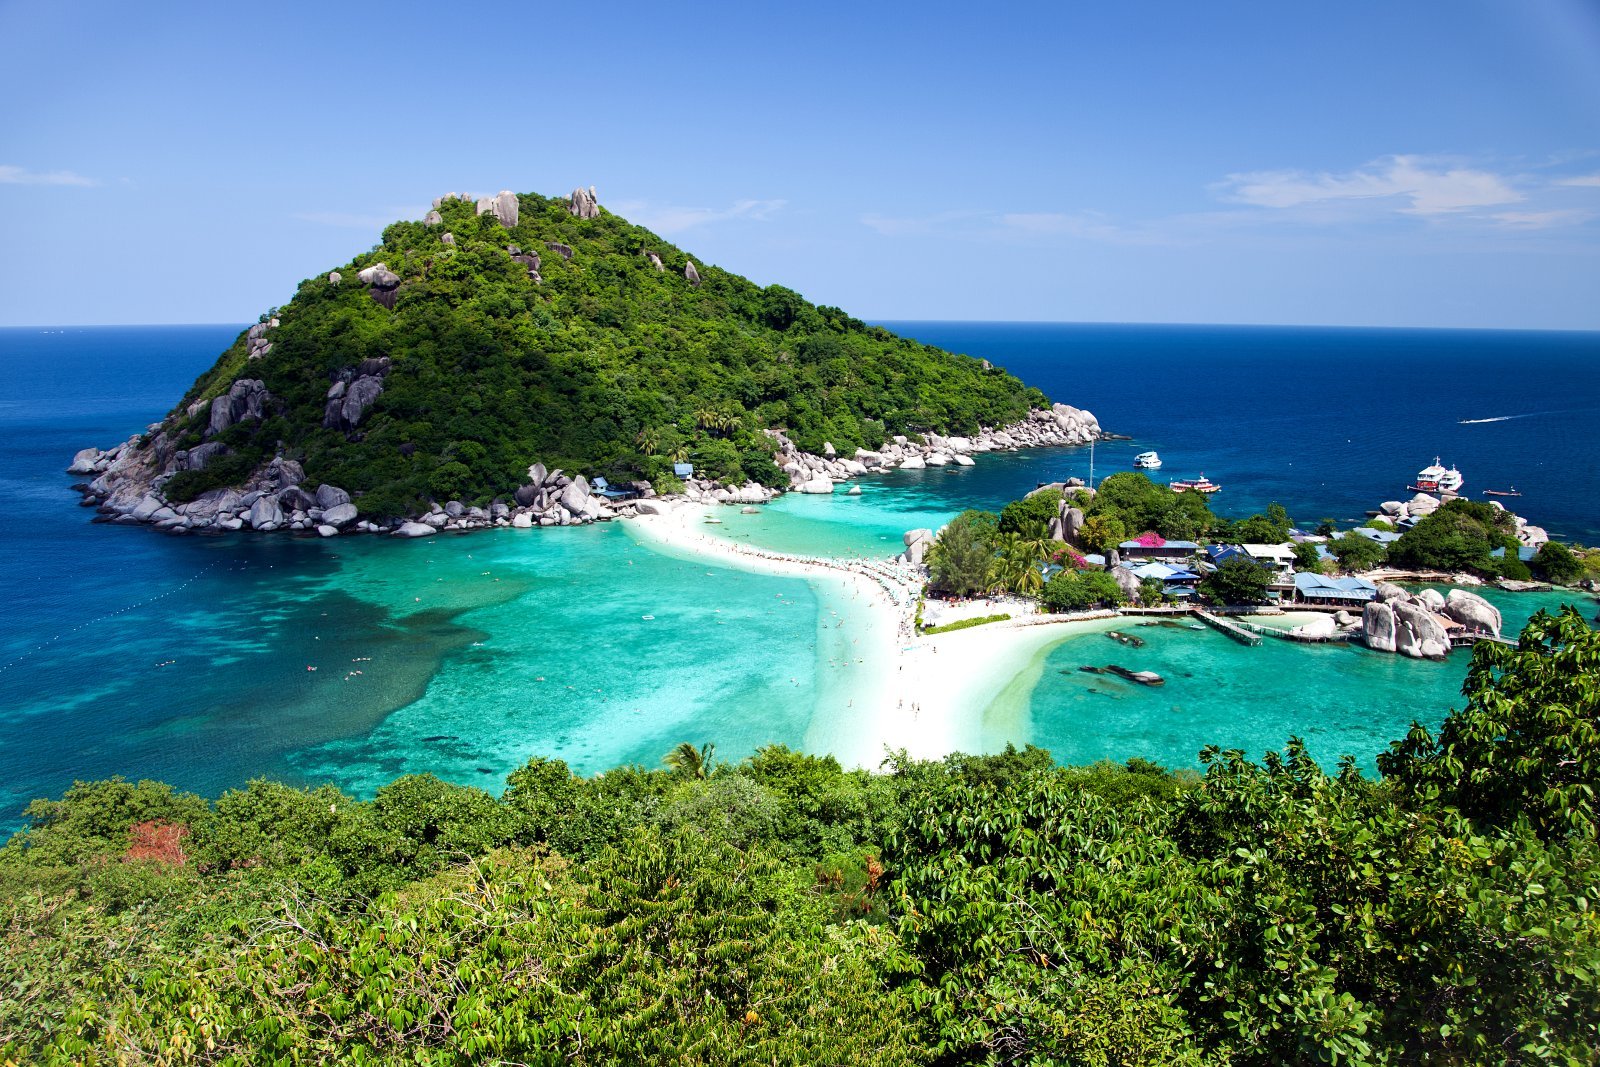 <p class="wp-caption-text">Image Credit: Shutterstock / SERG60</p>  <p><span>Koh Tao, a small island in the Gulf of Thailand, has carved out a reputation as a premier destination for divers and snorkelers, drawn to its clear waters, abundant marine life, and vibrant coral reefs. Beyond its underwater magic, Koh Tao is deeply committed to marine conservation, with numerous dive shops and local organizations leading efforts in restoring coral reefs and protecting marine species. The island’s rugged terrain offers adventurous trails leading to secluded bays and stunning viewpoints, balancing land and sea activities. Though more subdued than its larger neighbors, the nightlife and dining scene offers a glimpse into the island’s community spirit, with local businesses supporting sustainable practices. Koh Tao’s blend of natural beauty, adventurous spirit, and commitment to conservation makes it a unique destination for eco-conscious travelers seeking to explore Thailand’s underwater wonders while contributing to their preservation.</span></p>